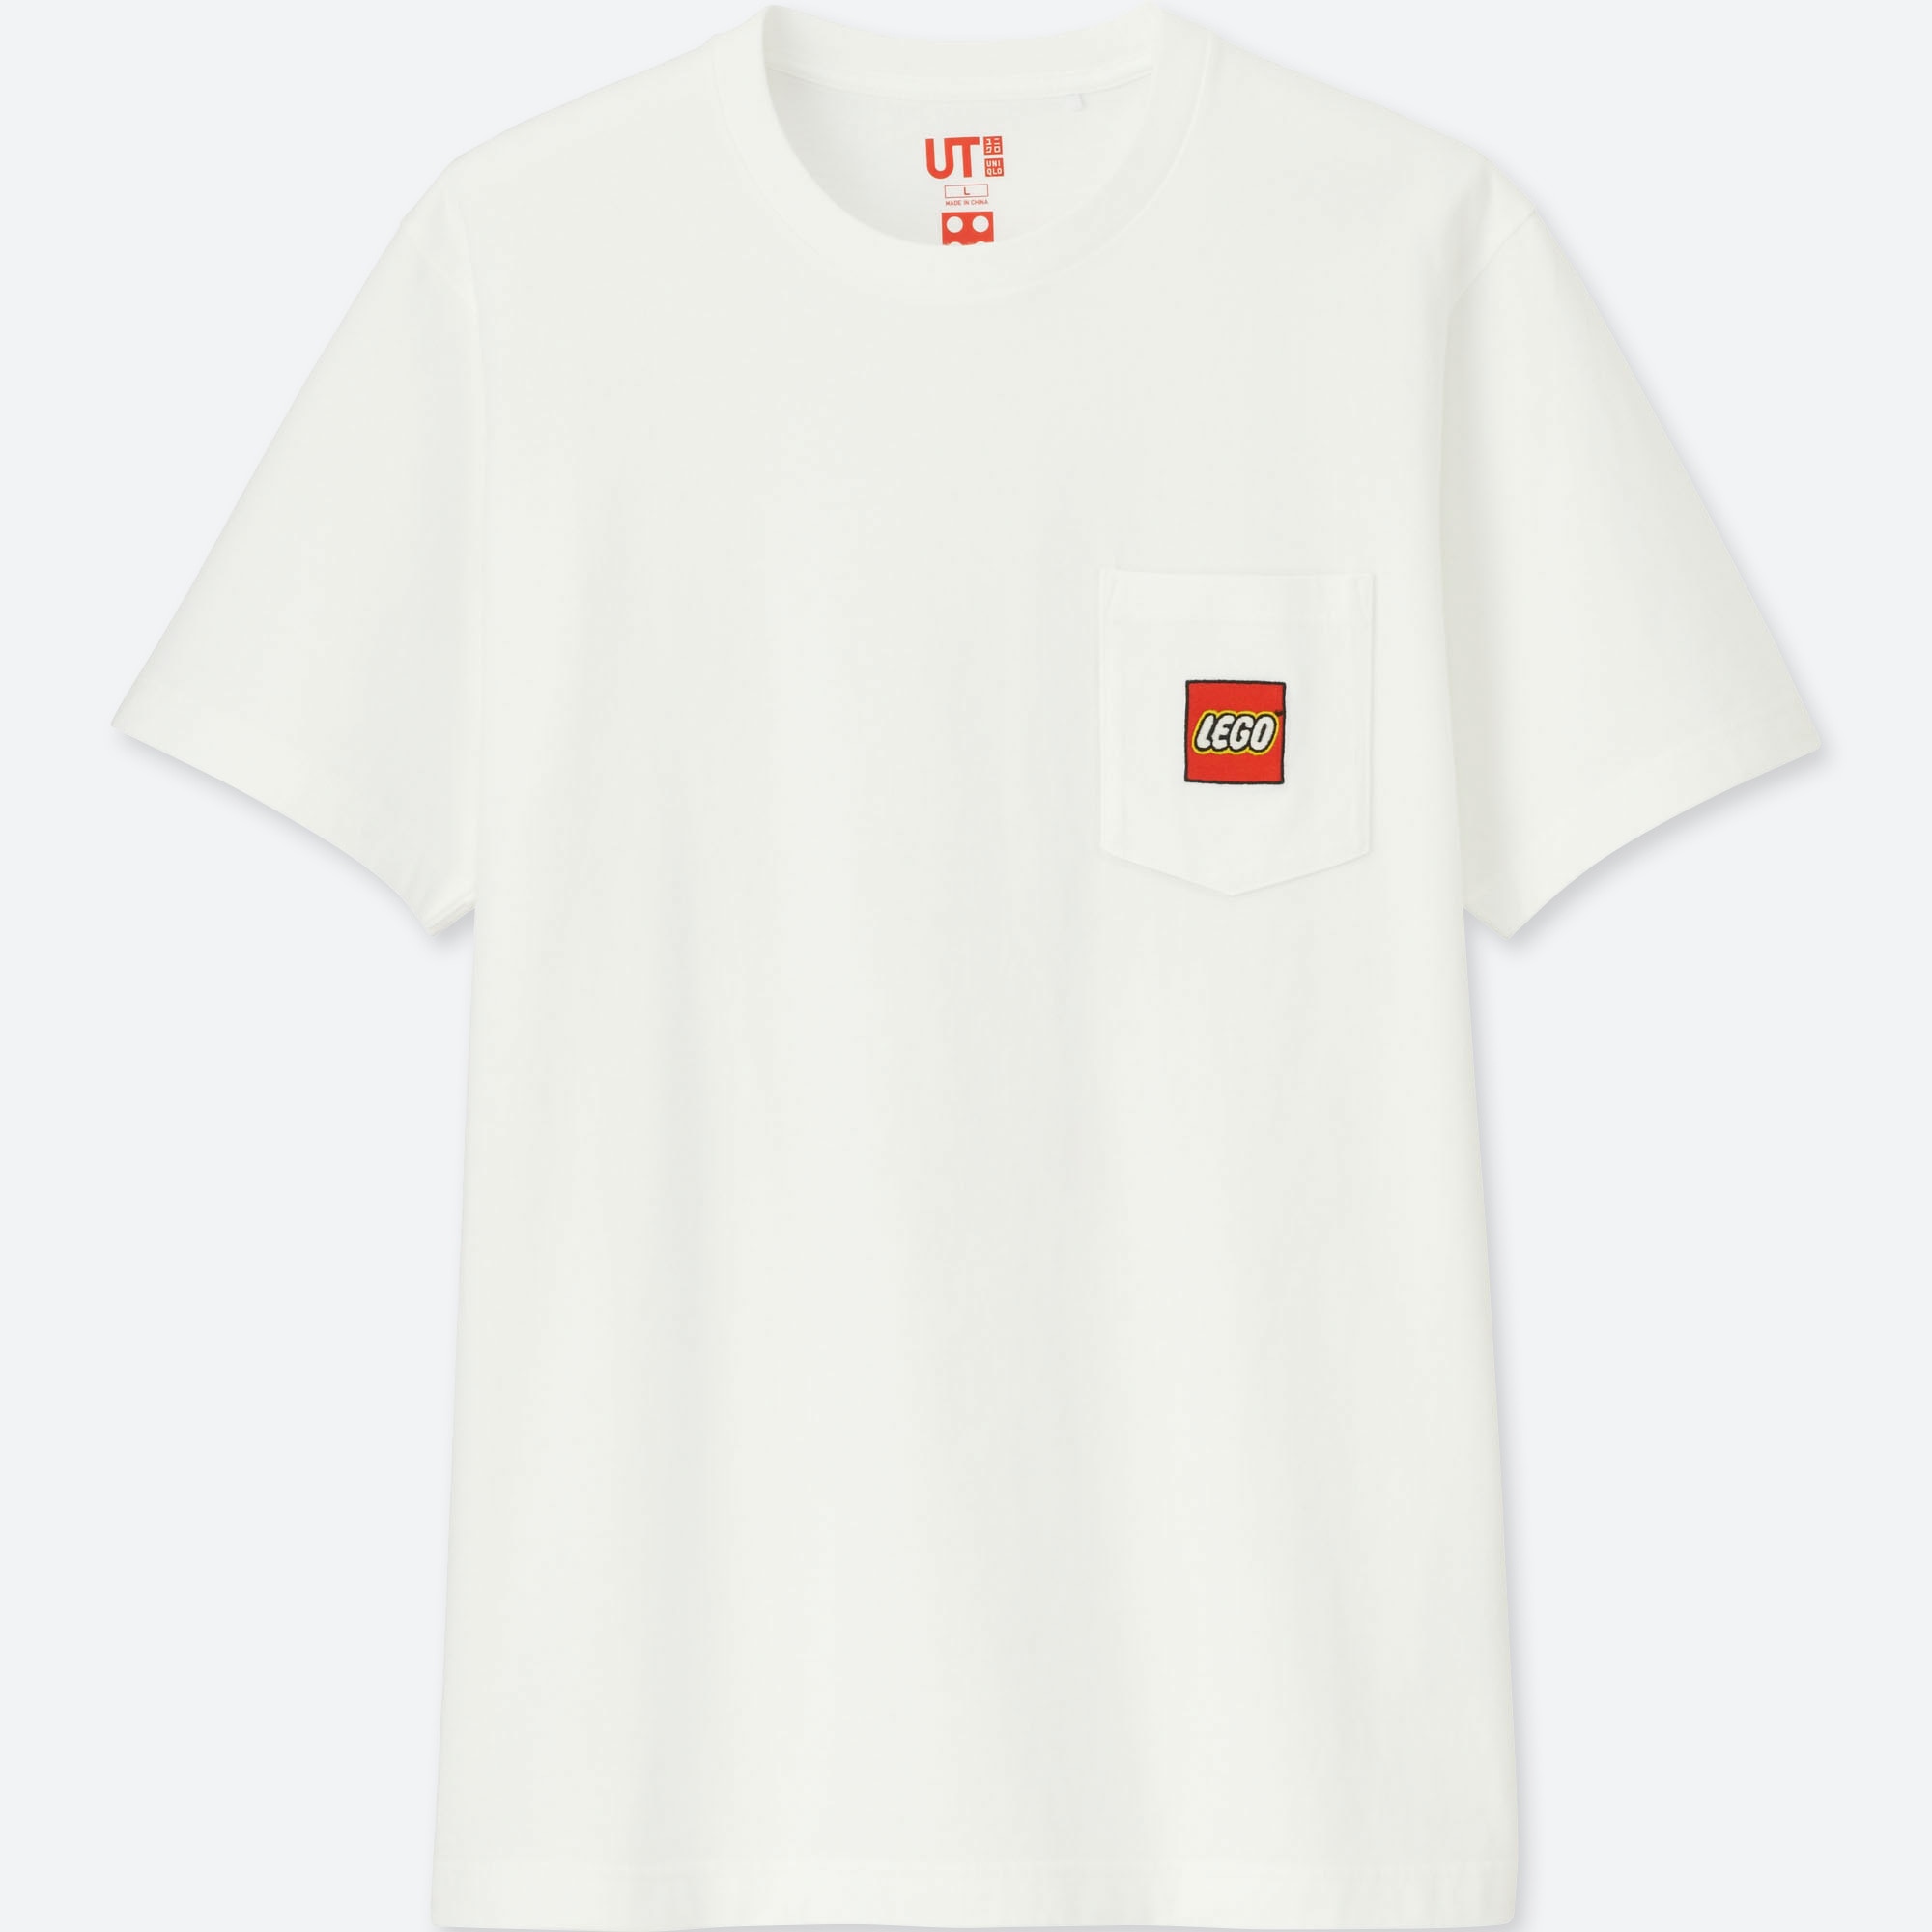 UNIQLO A Singaporean Love Story Collection Has Relationship Memes